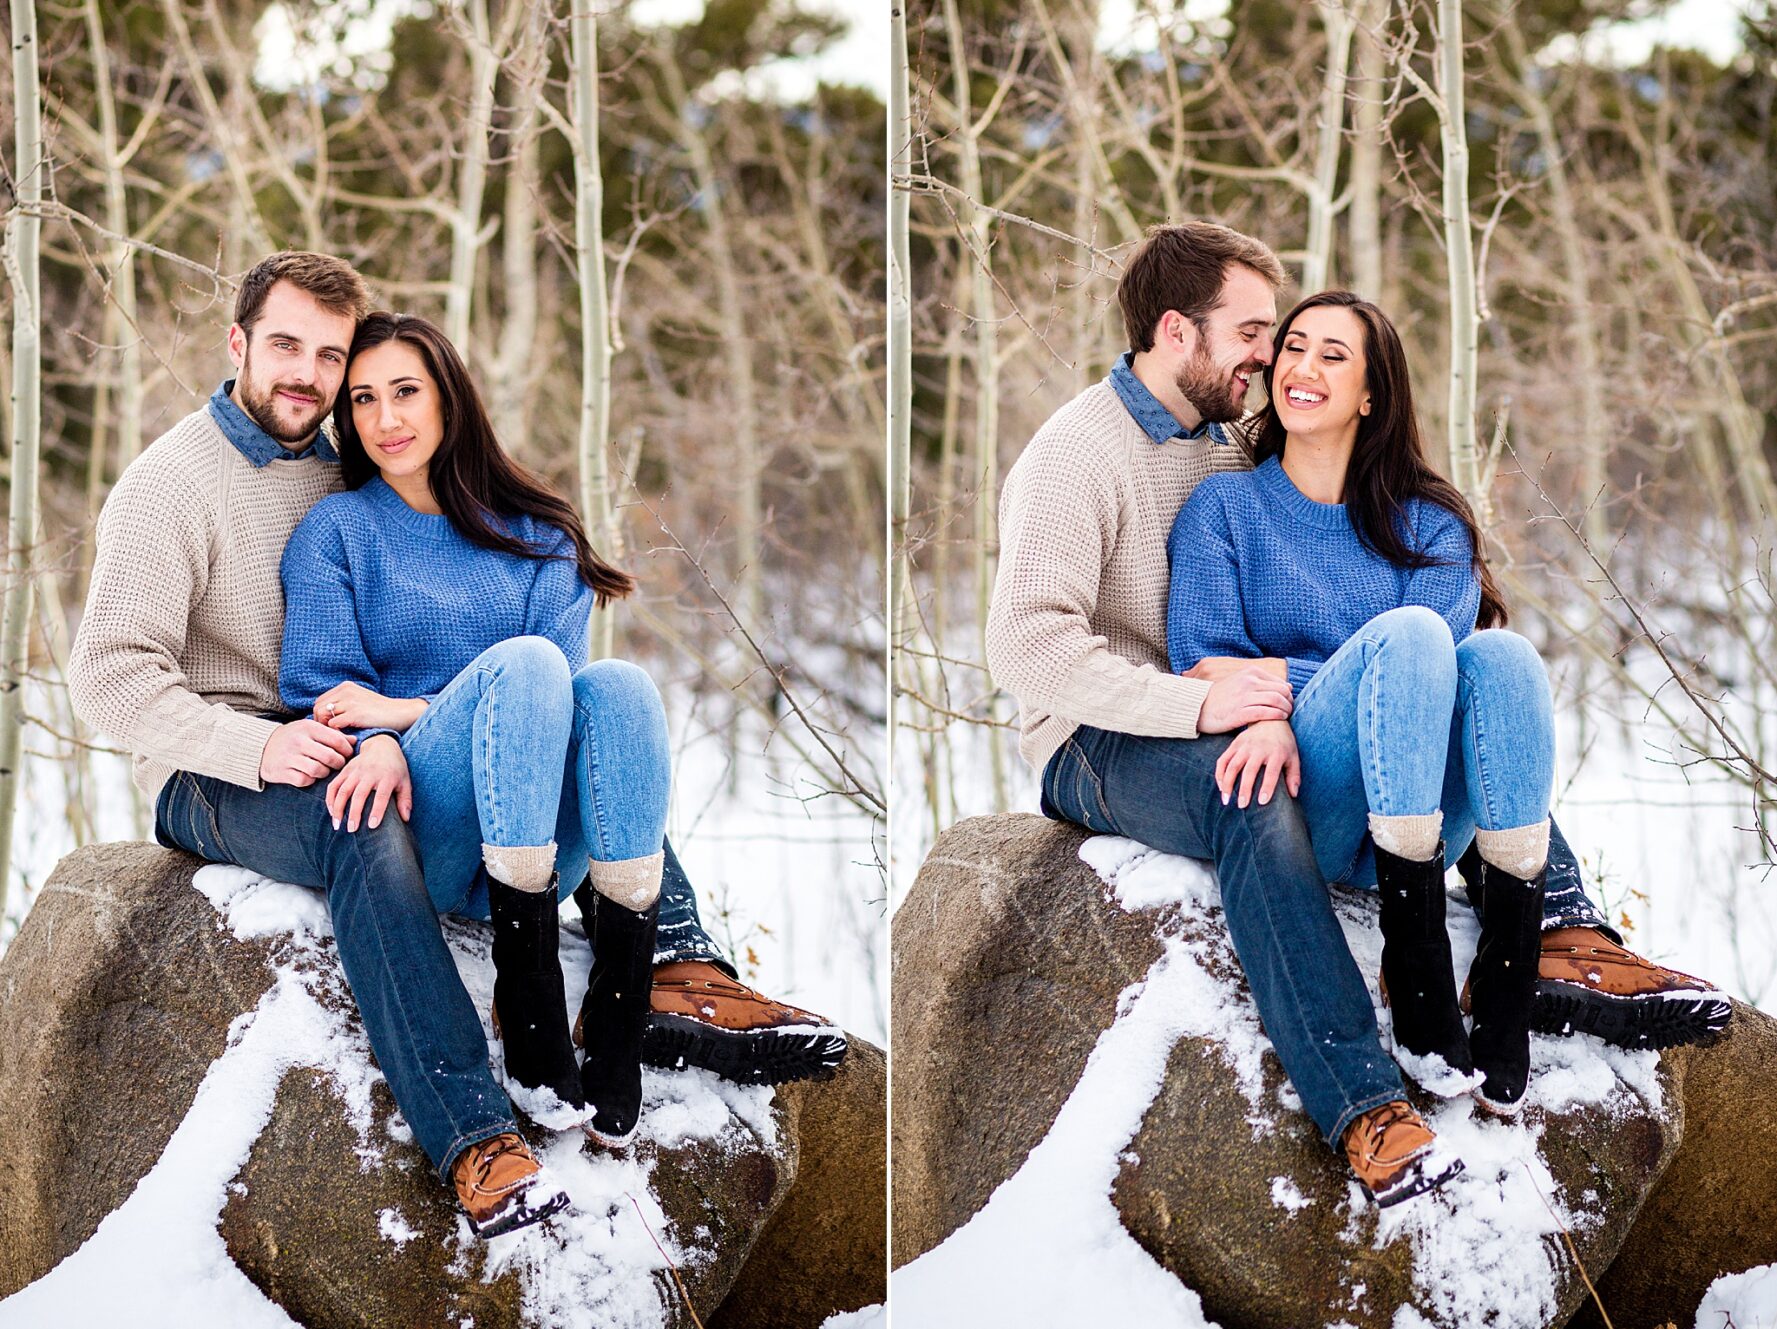 Morrison Private Ranch Engagement Session with Horses. Colorado Engagement Photography by All Digital Photo & Video. Morrison Engagement Photography, Horse Engagement Session, Ranch Engagement Session, Colorado Engagement Photos, Mountain Engagement Photos, Winter Engagement Photos, Snowy Engagement Photos, Mountain Engagement Photography, Denver Engagement Photography, Rocky Mountain Engagement